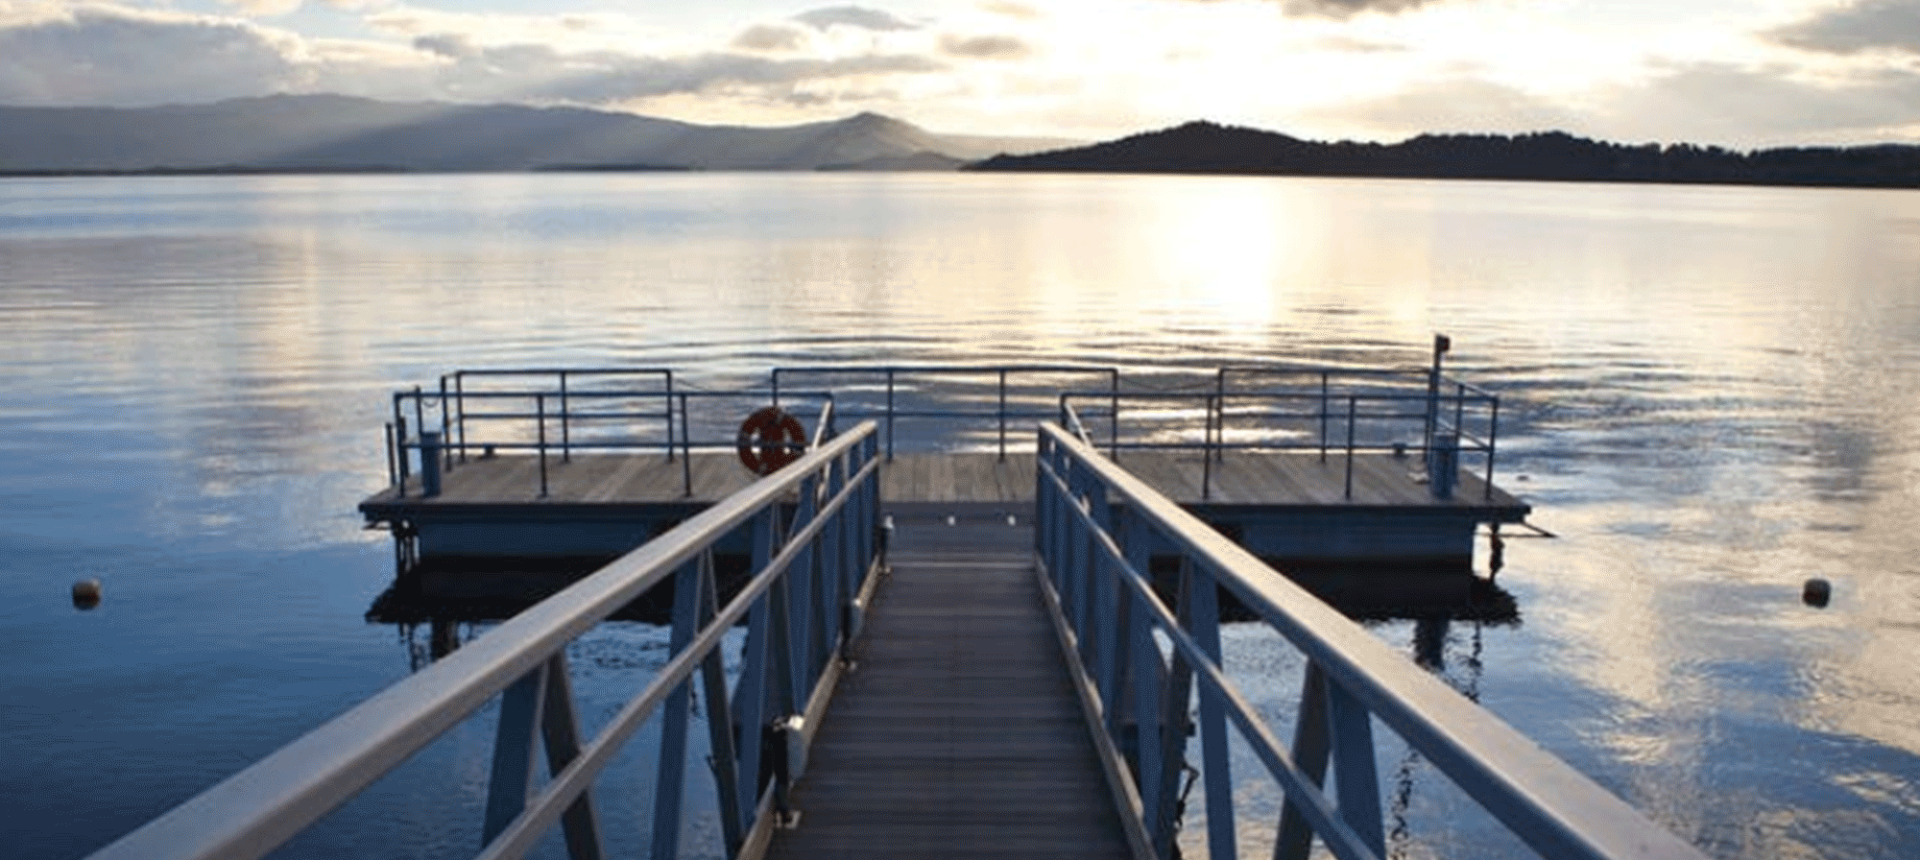 a dock sitting on a body of water with mountains in the back